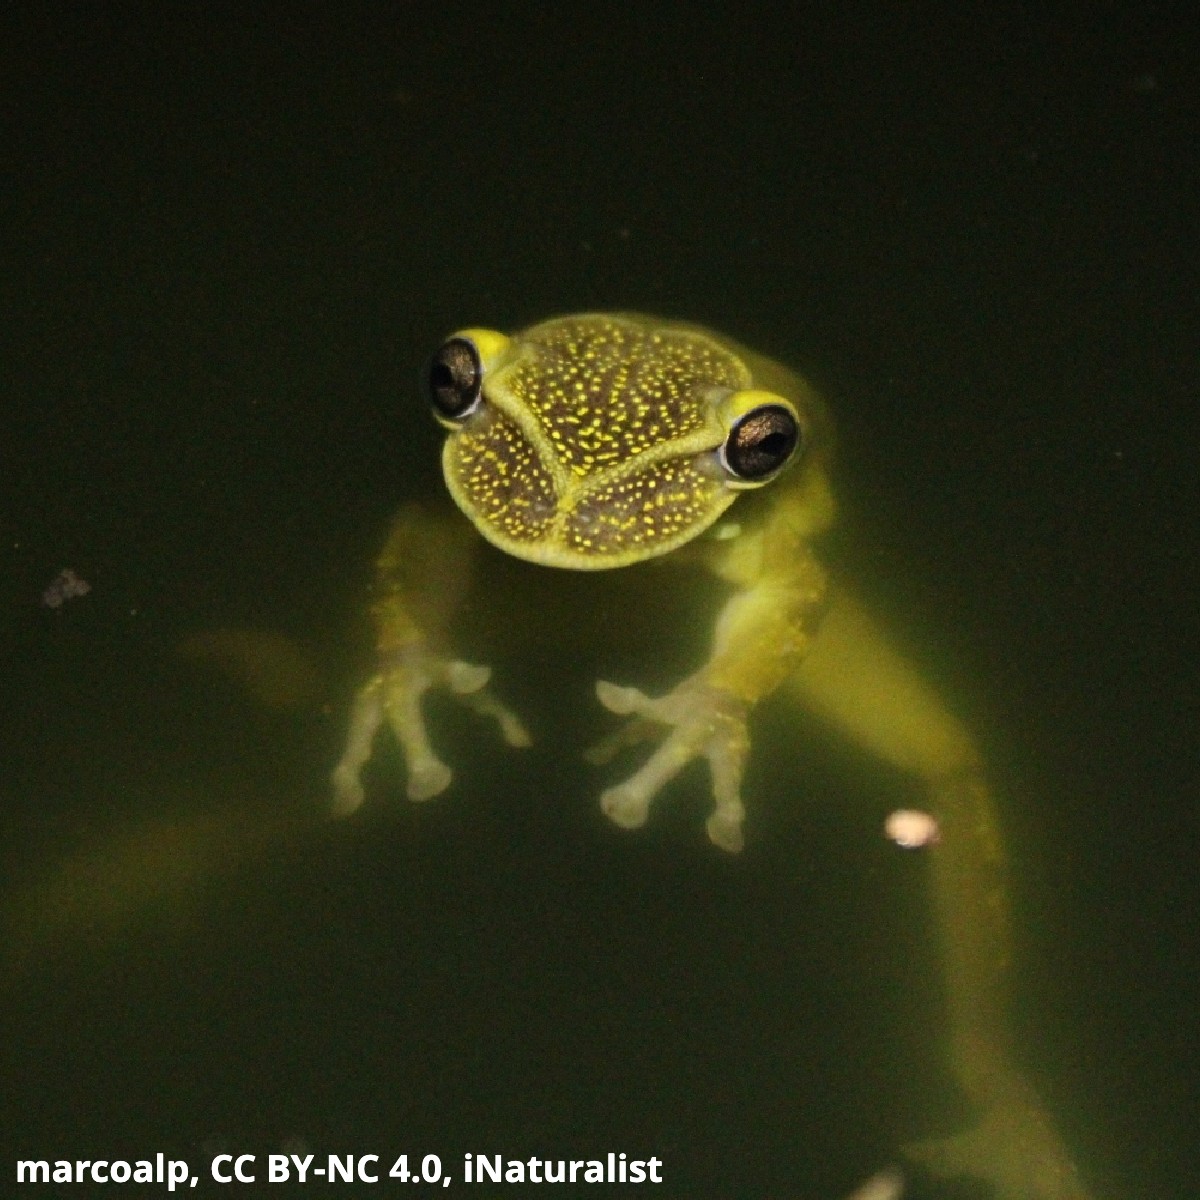 Is this amphibian a visitor from outer space? 🛸 No, it’s the Yucatan casque-headed tree frog! How does it put its unique head to use? When it nestles into tree holes, it plugs the opening with its hard head. This is thought to help the frog moisture in its skin!